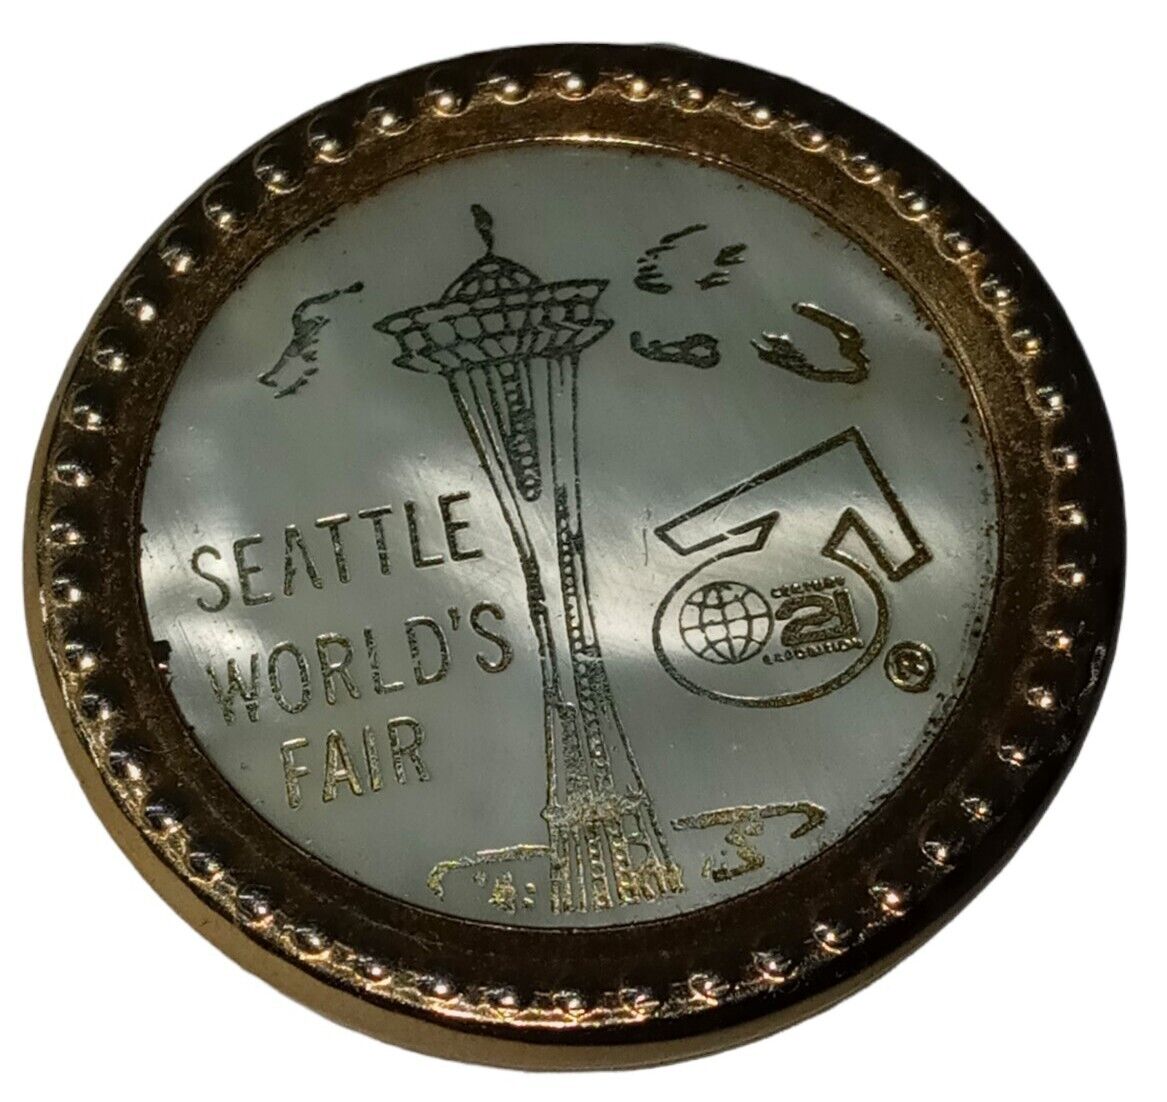 Vintage 1962 Seattle World's Fair Gold Tone Mother Of Pearl Round Pin Brooch